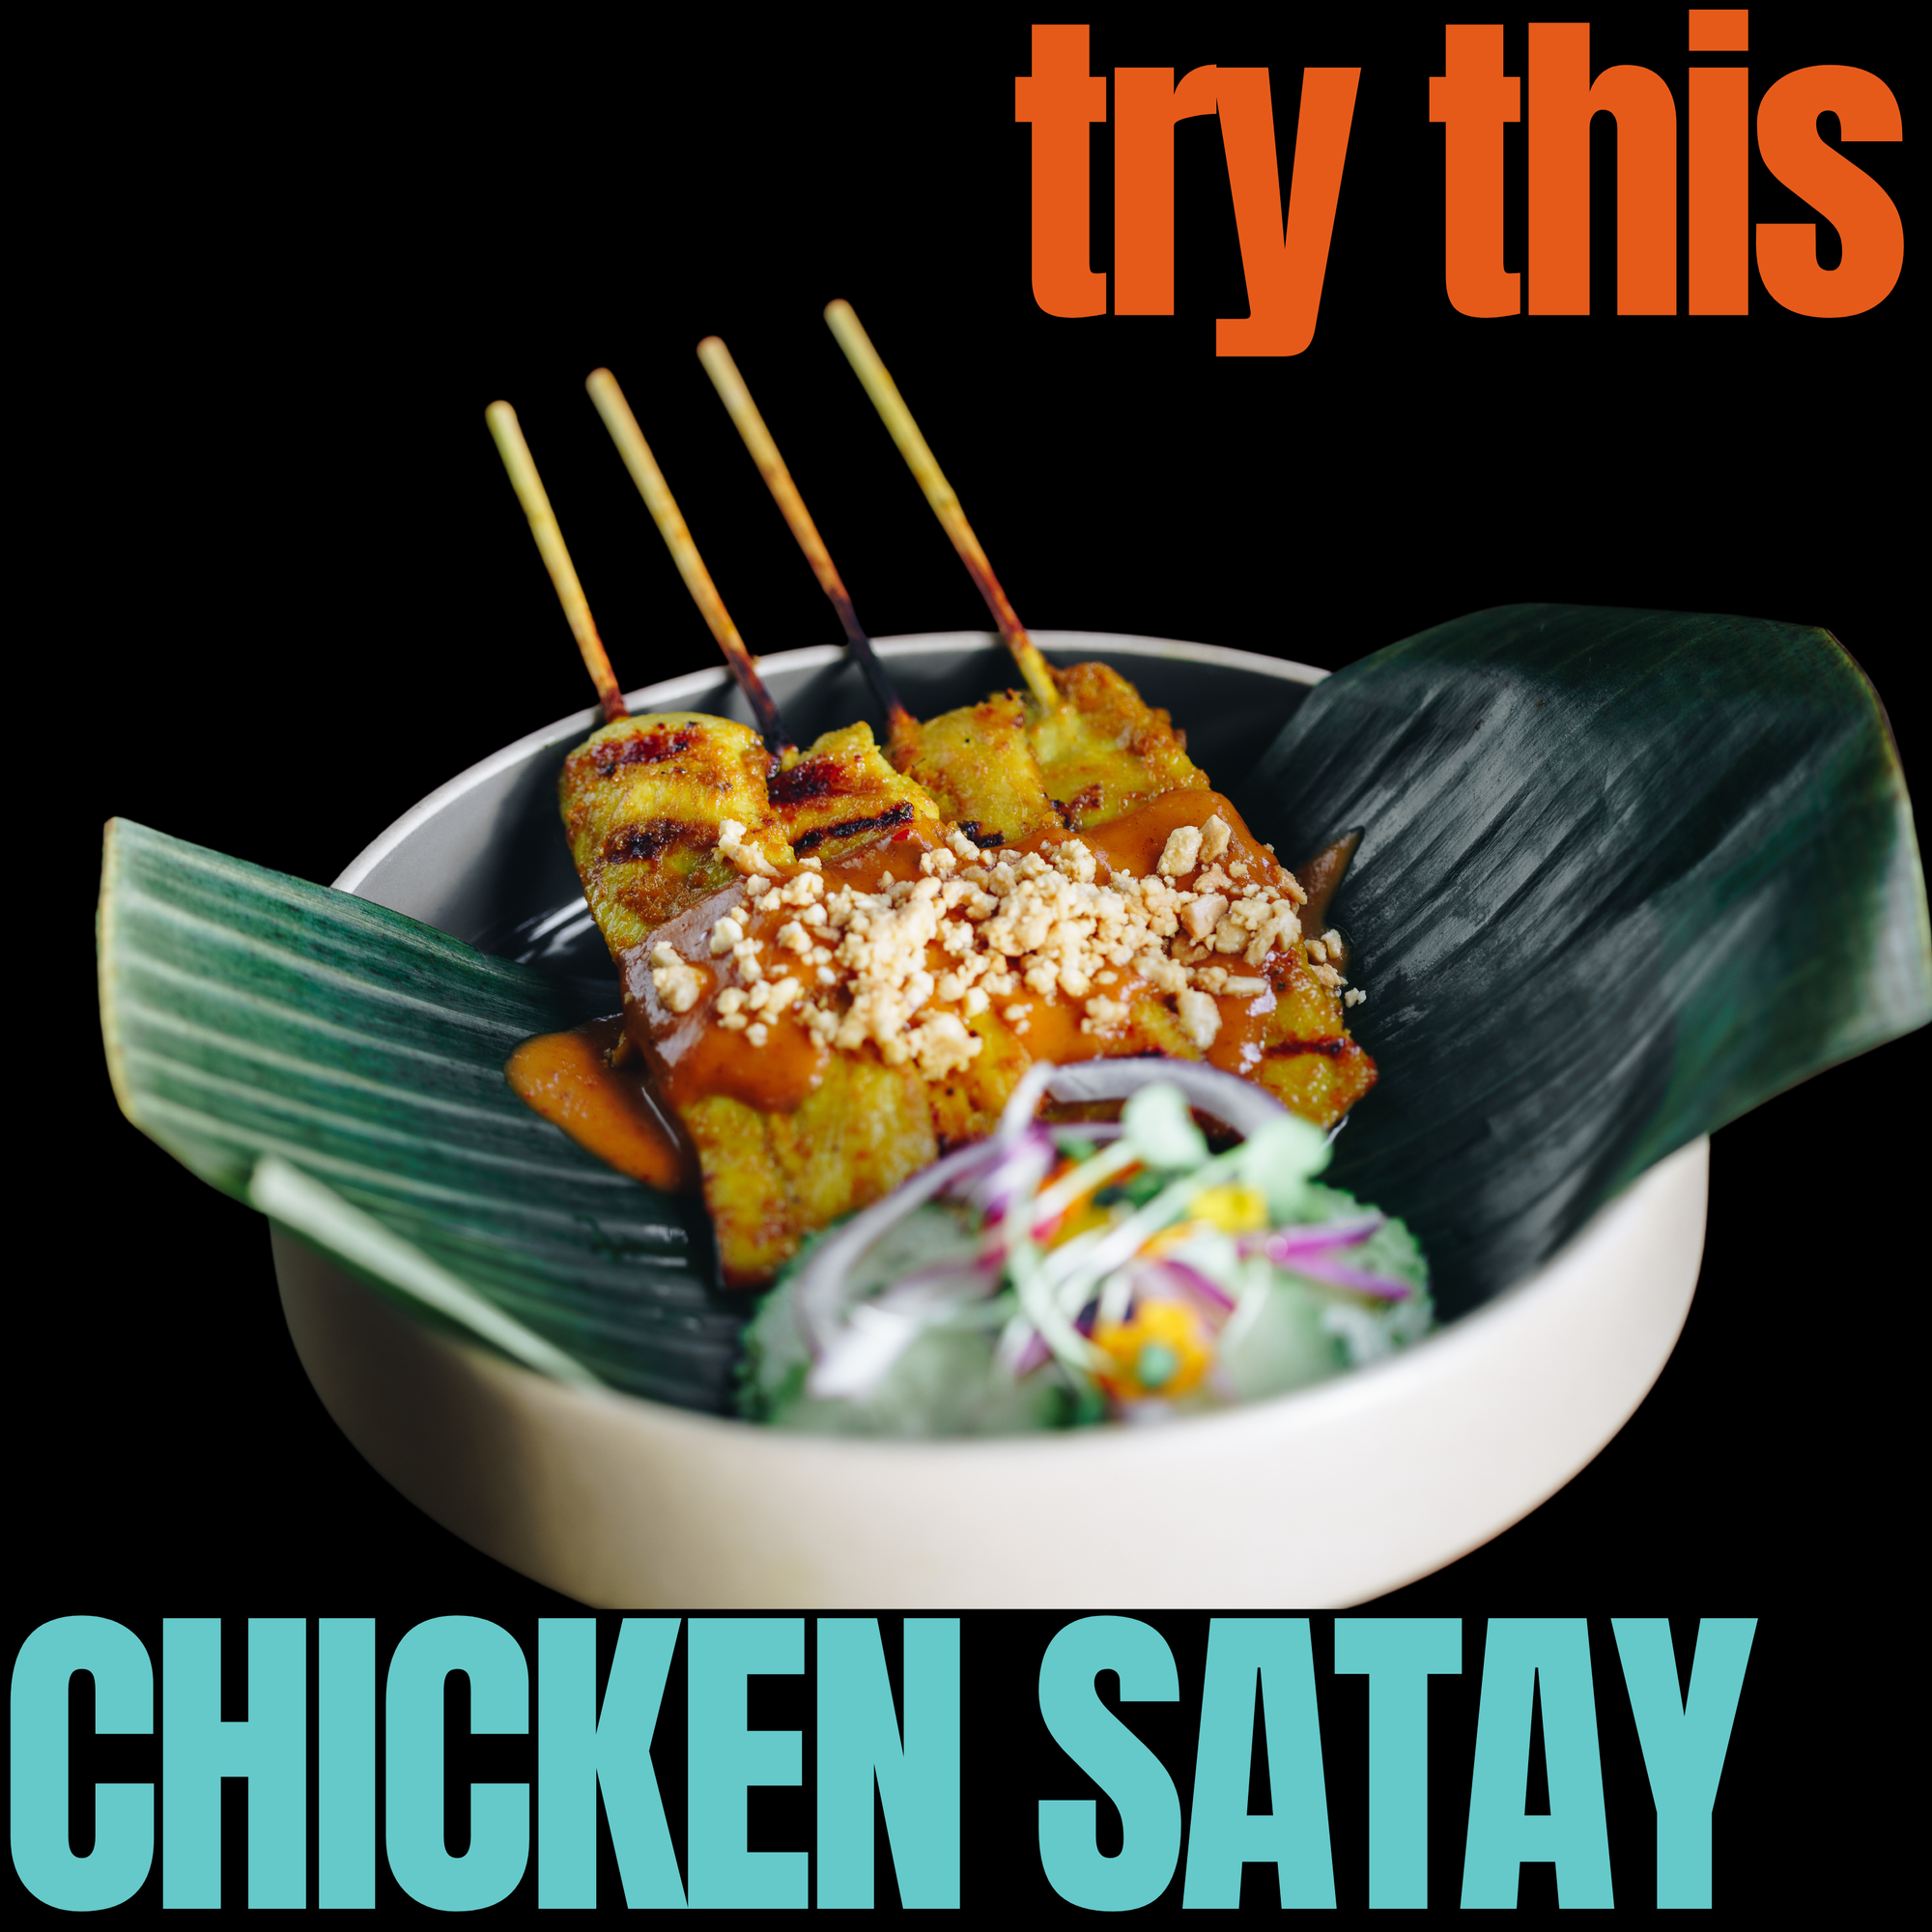 TRY THIS - CHICKEN SATAY